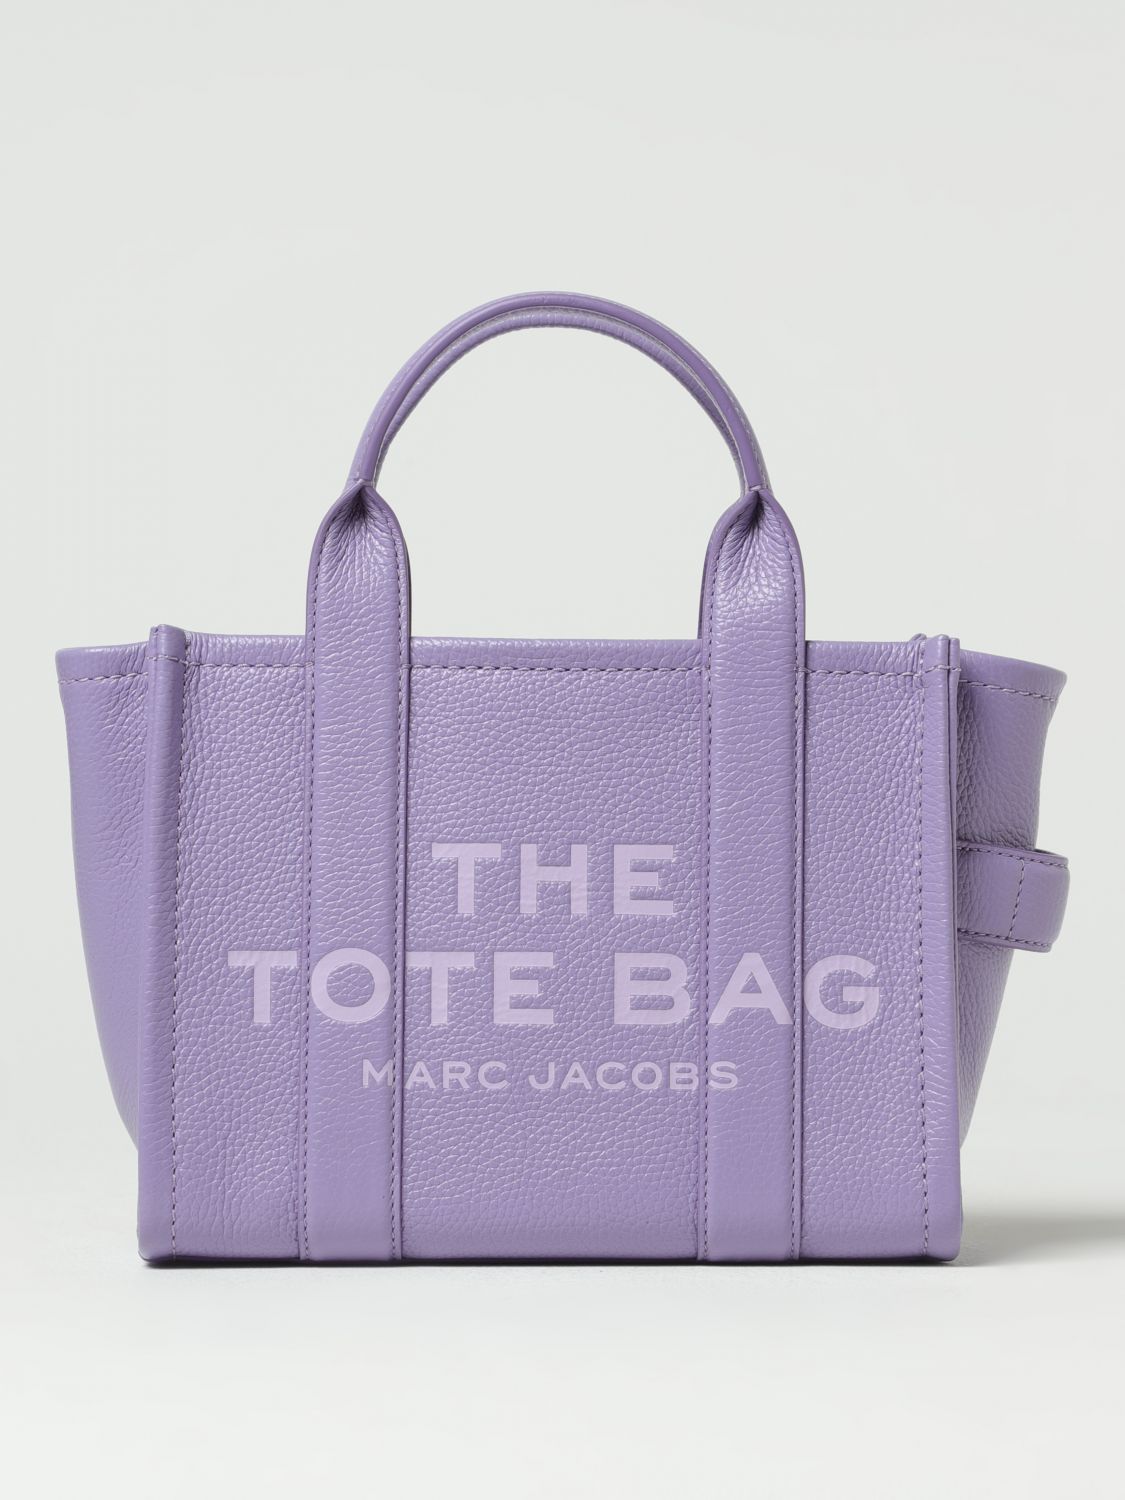 MARC JACOBS: The Tote Bag in grained leather - Yellow  Marc Jacobs handbag  H009L01SP21 online at